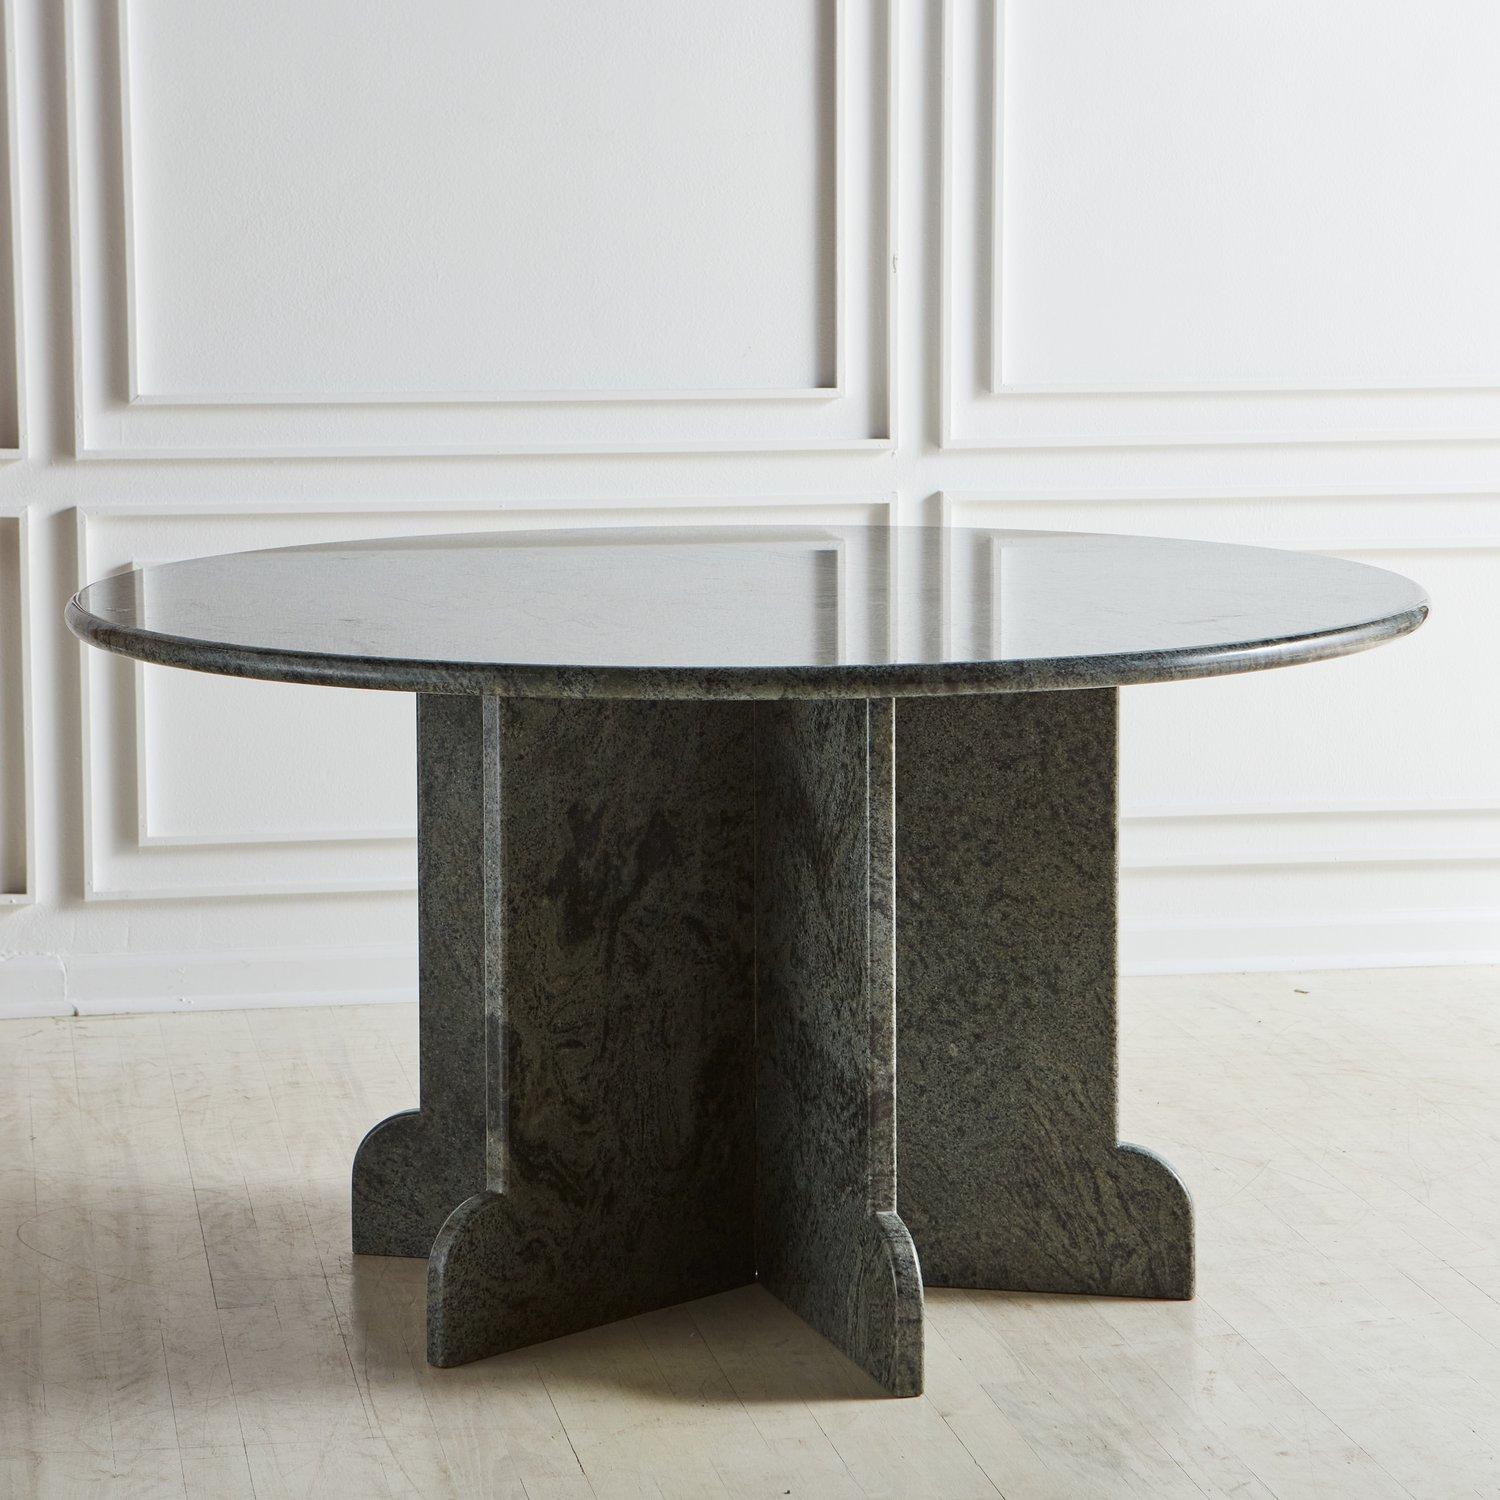 A vintage dining table constructed with green granite featuring a 1” thick round tabletop, which sits on a unique base with curved feet. The base consists of three separate sections. Each section is made with two granite slabs. USA, 20th century.